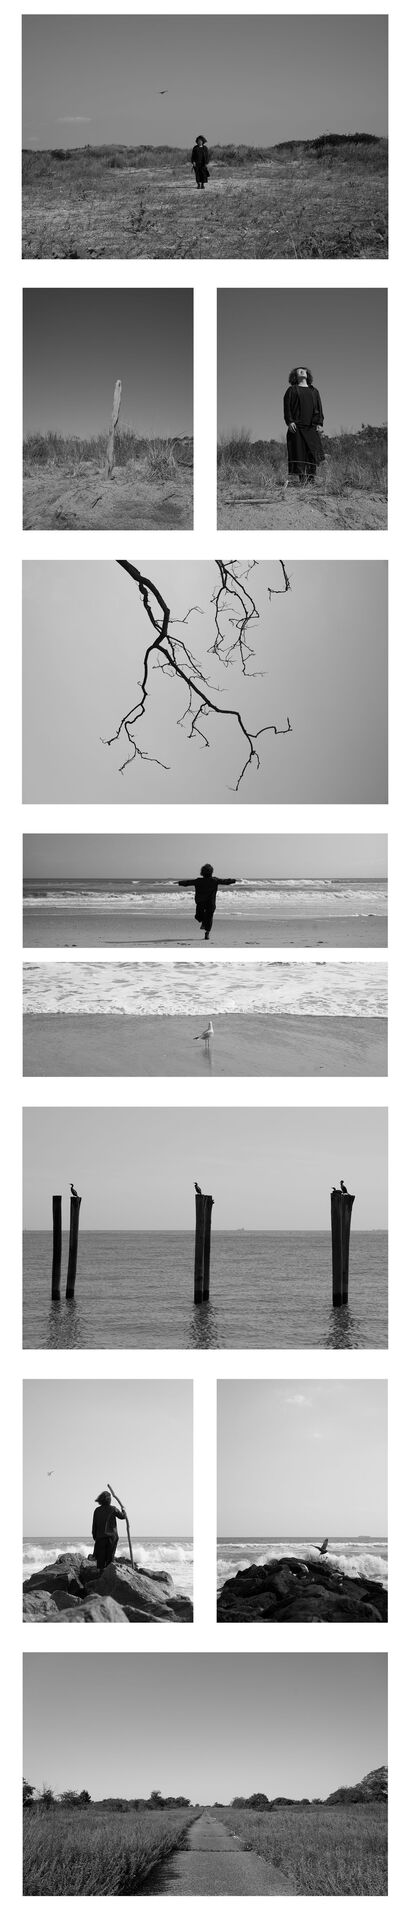 Song of a Lonely Bird - a Photographic Art Artowrk by Jiaqi Liu